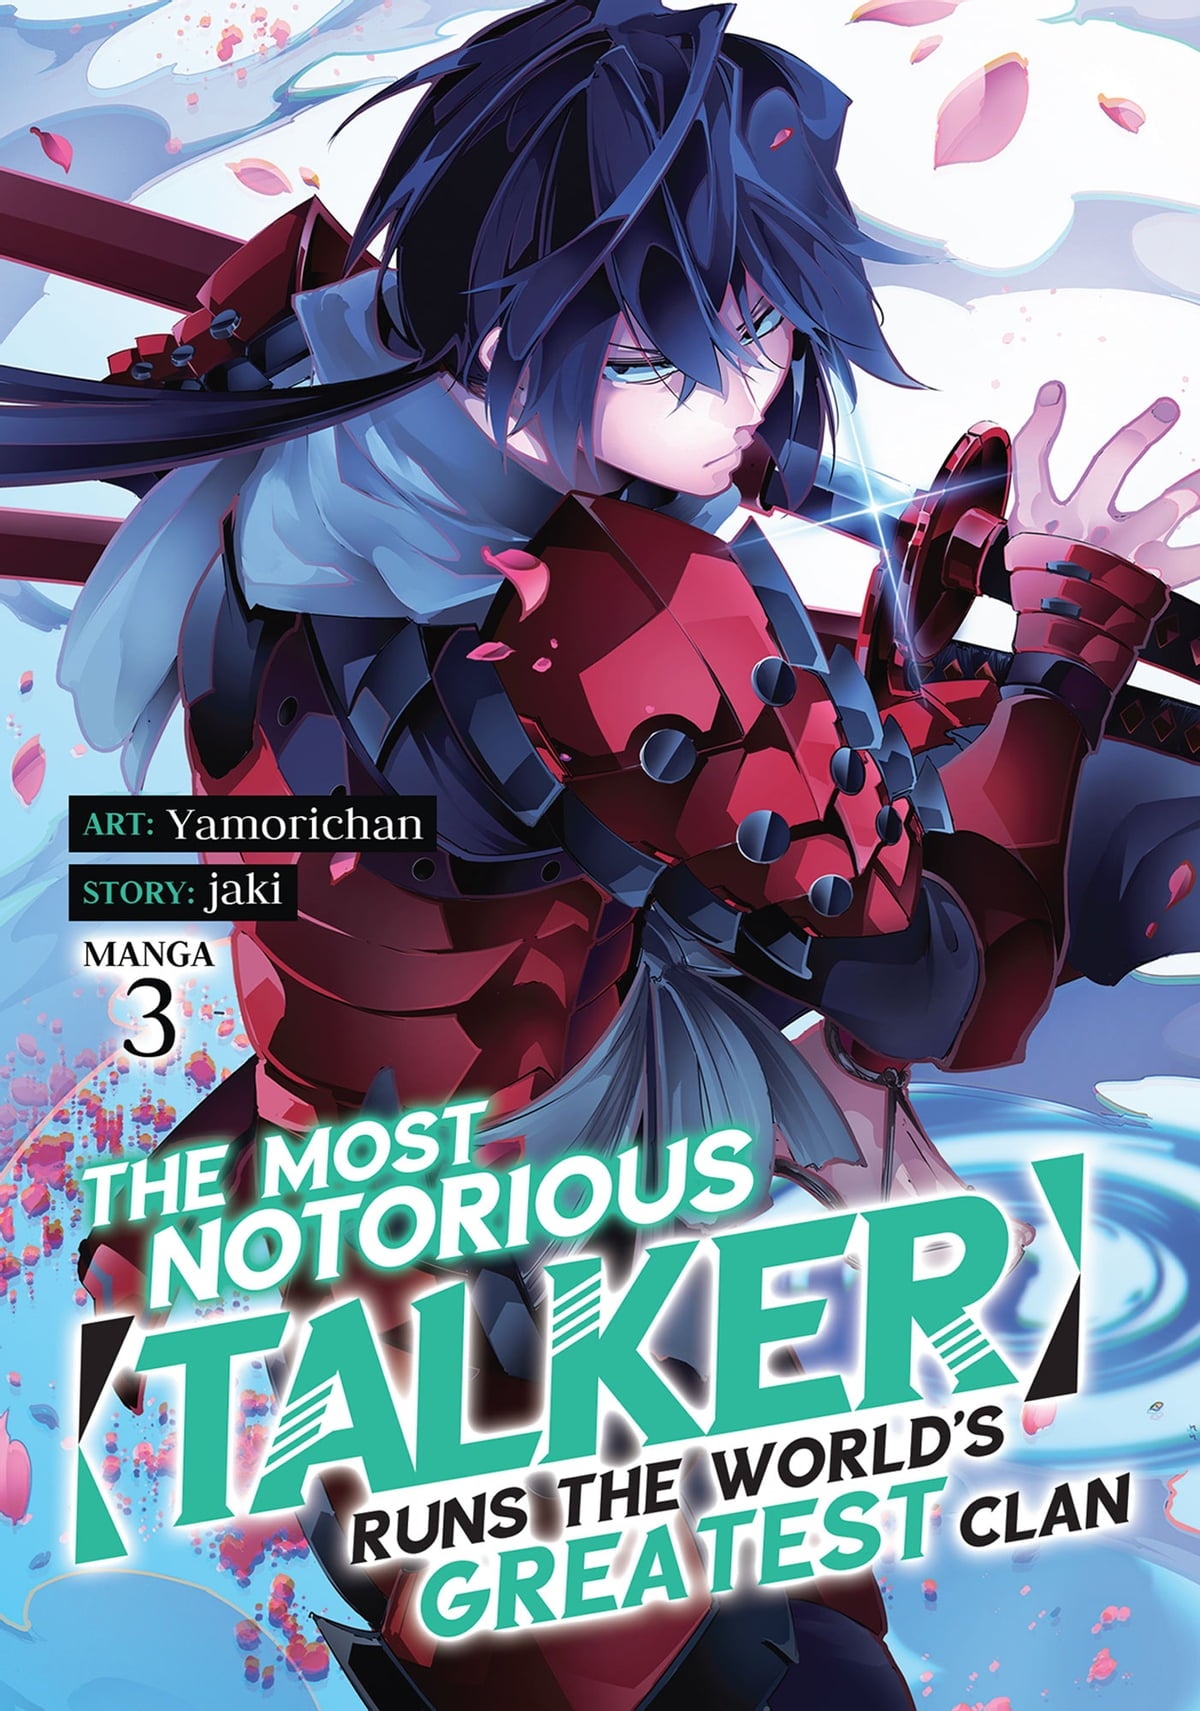 The Most Notorious Talker Runs the Worlds Greatest Clan (Manga) Vol. 03